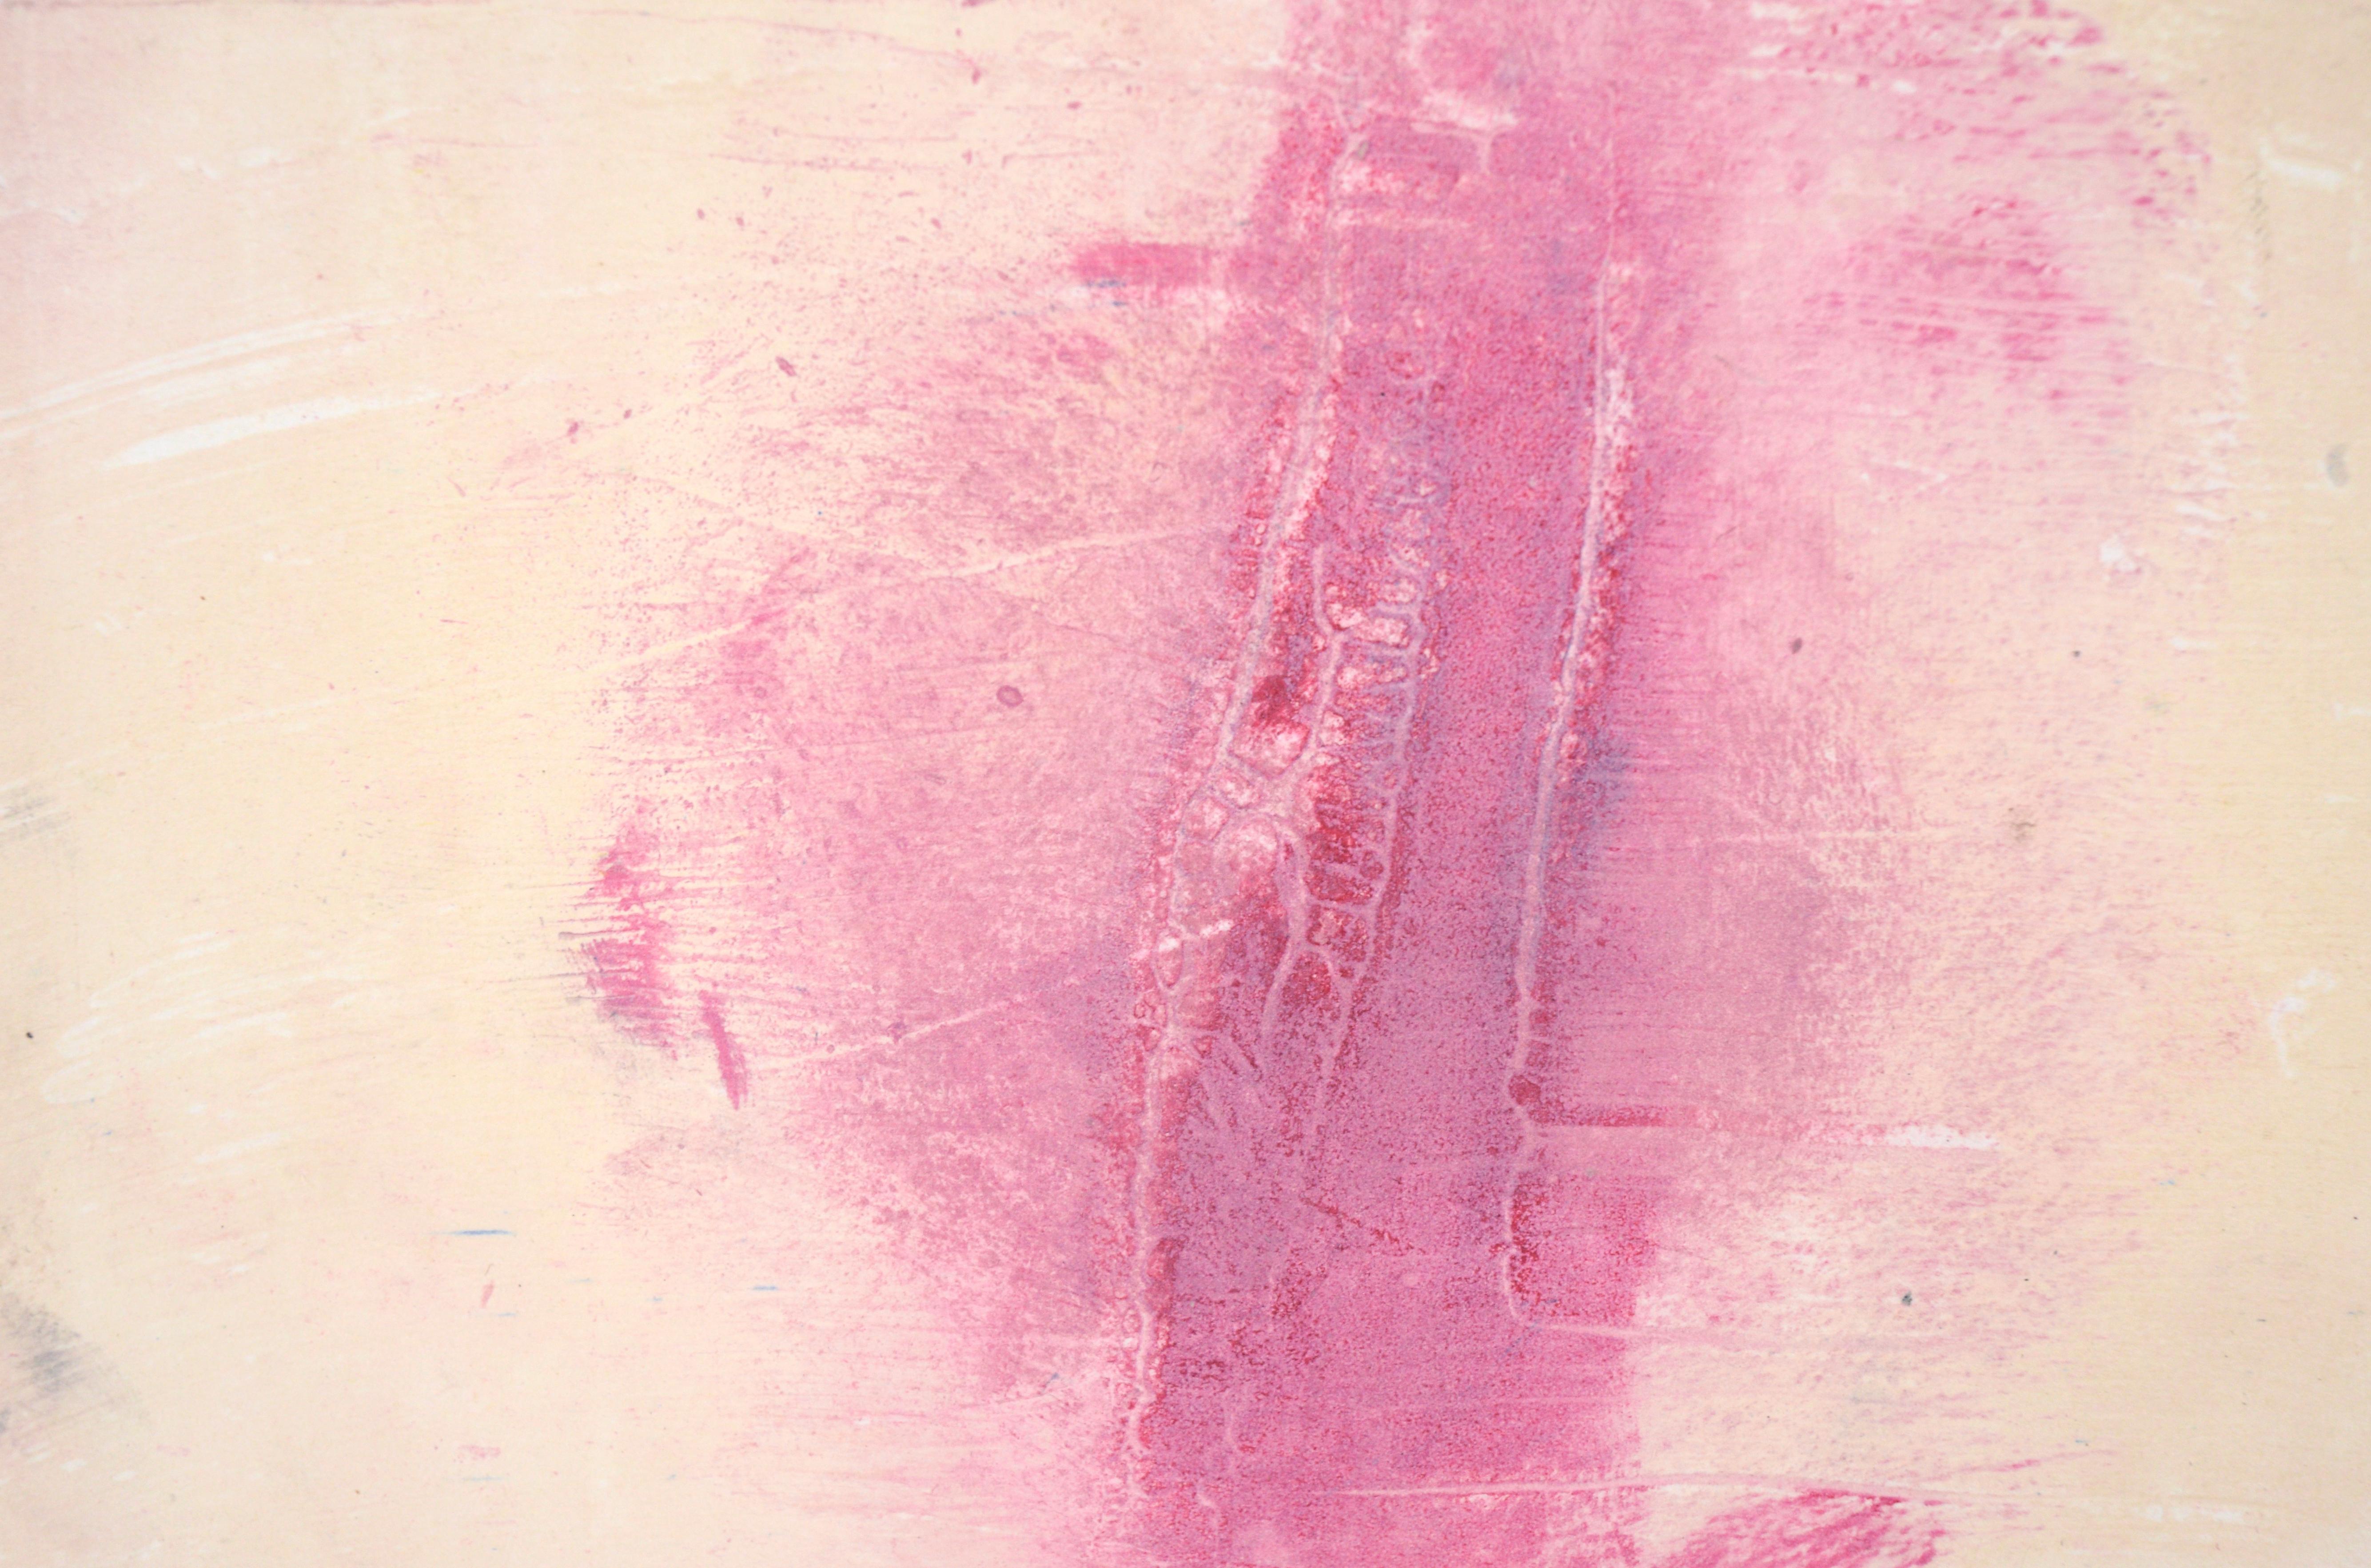 Pink on Yellow - Textured Transfer Monotype in Oil on Paper

Original hand painted and transfer monotype painting by California artist Heather Speck (American, 20th C). Pink textures stand out against a yellow background. There are naturalistic